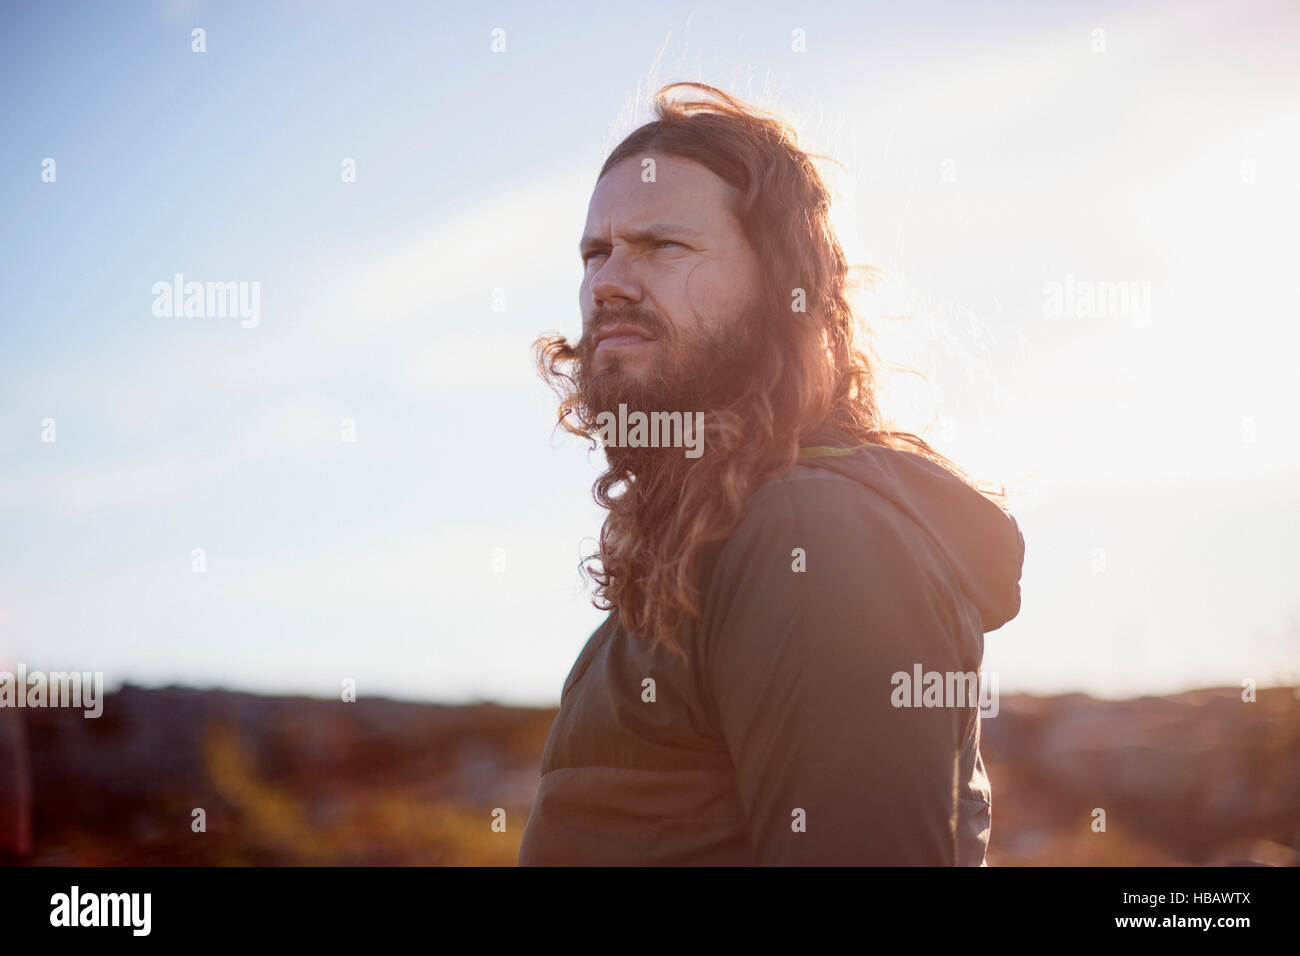 Man with long hair frowning in hot sun Stock Photo